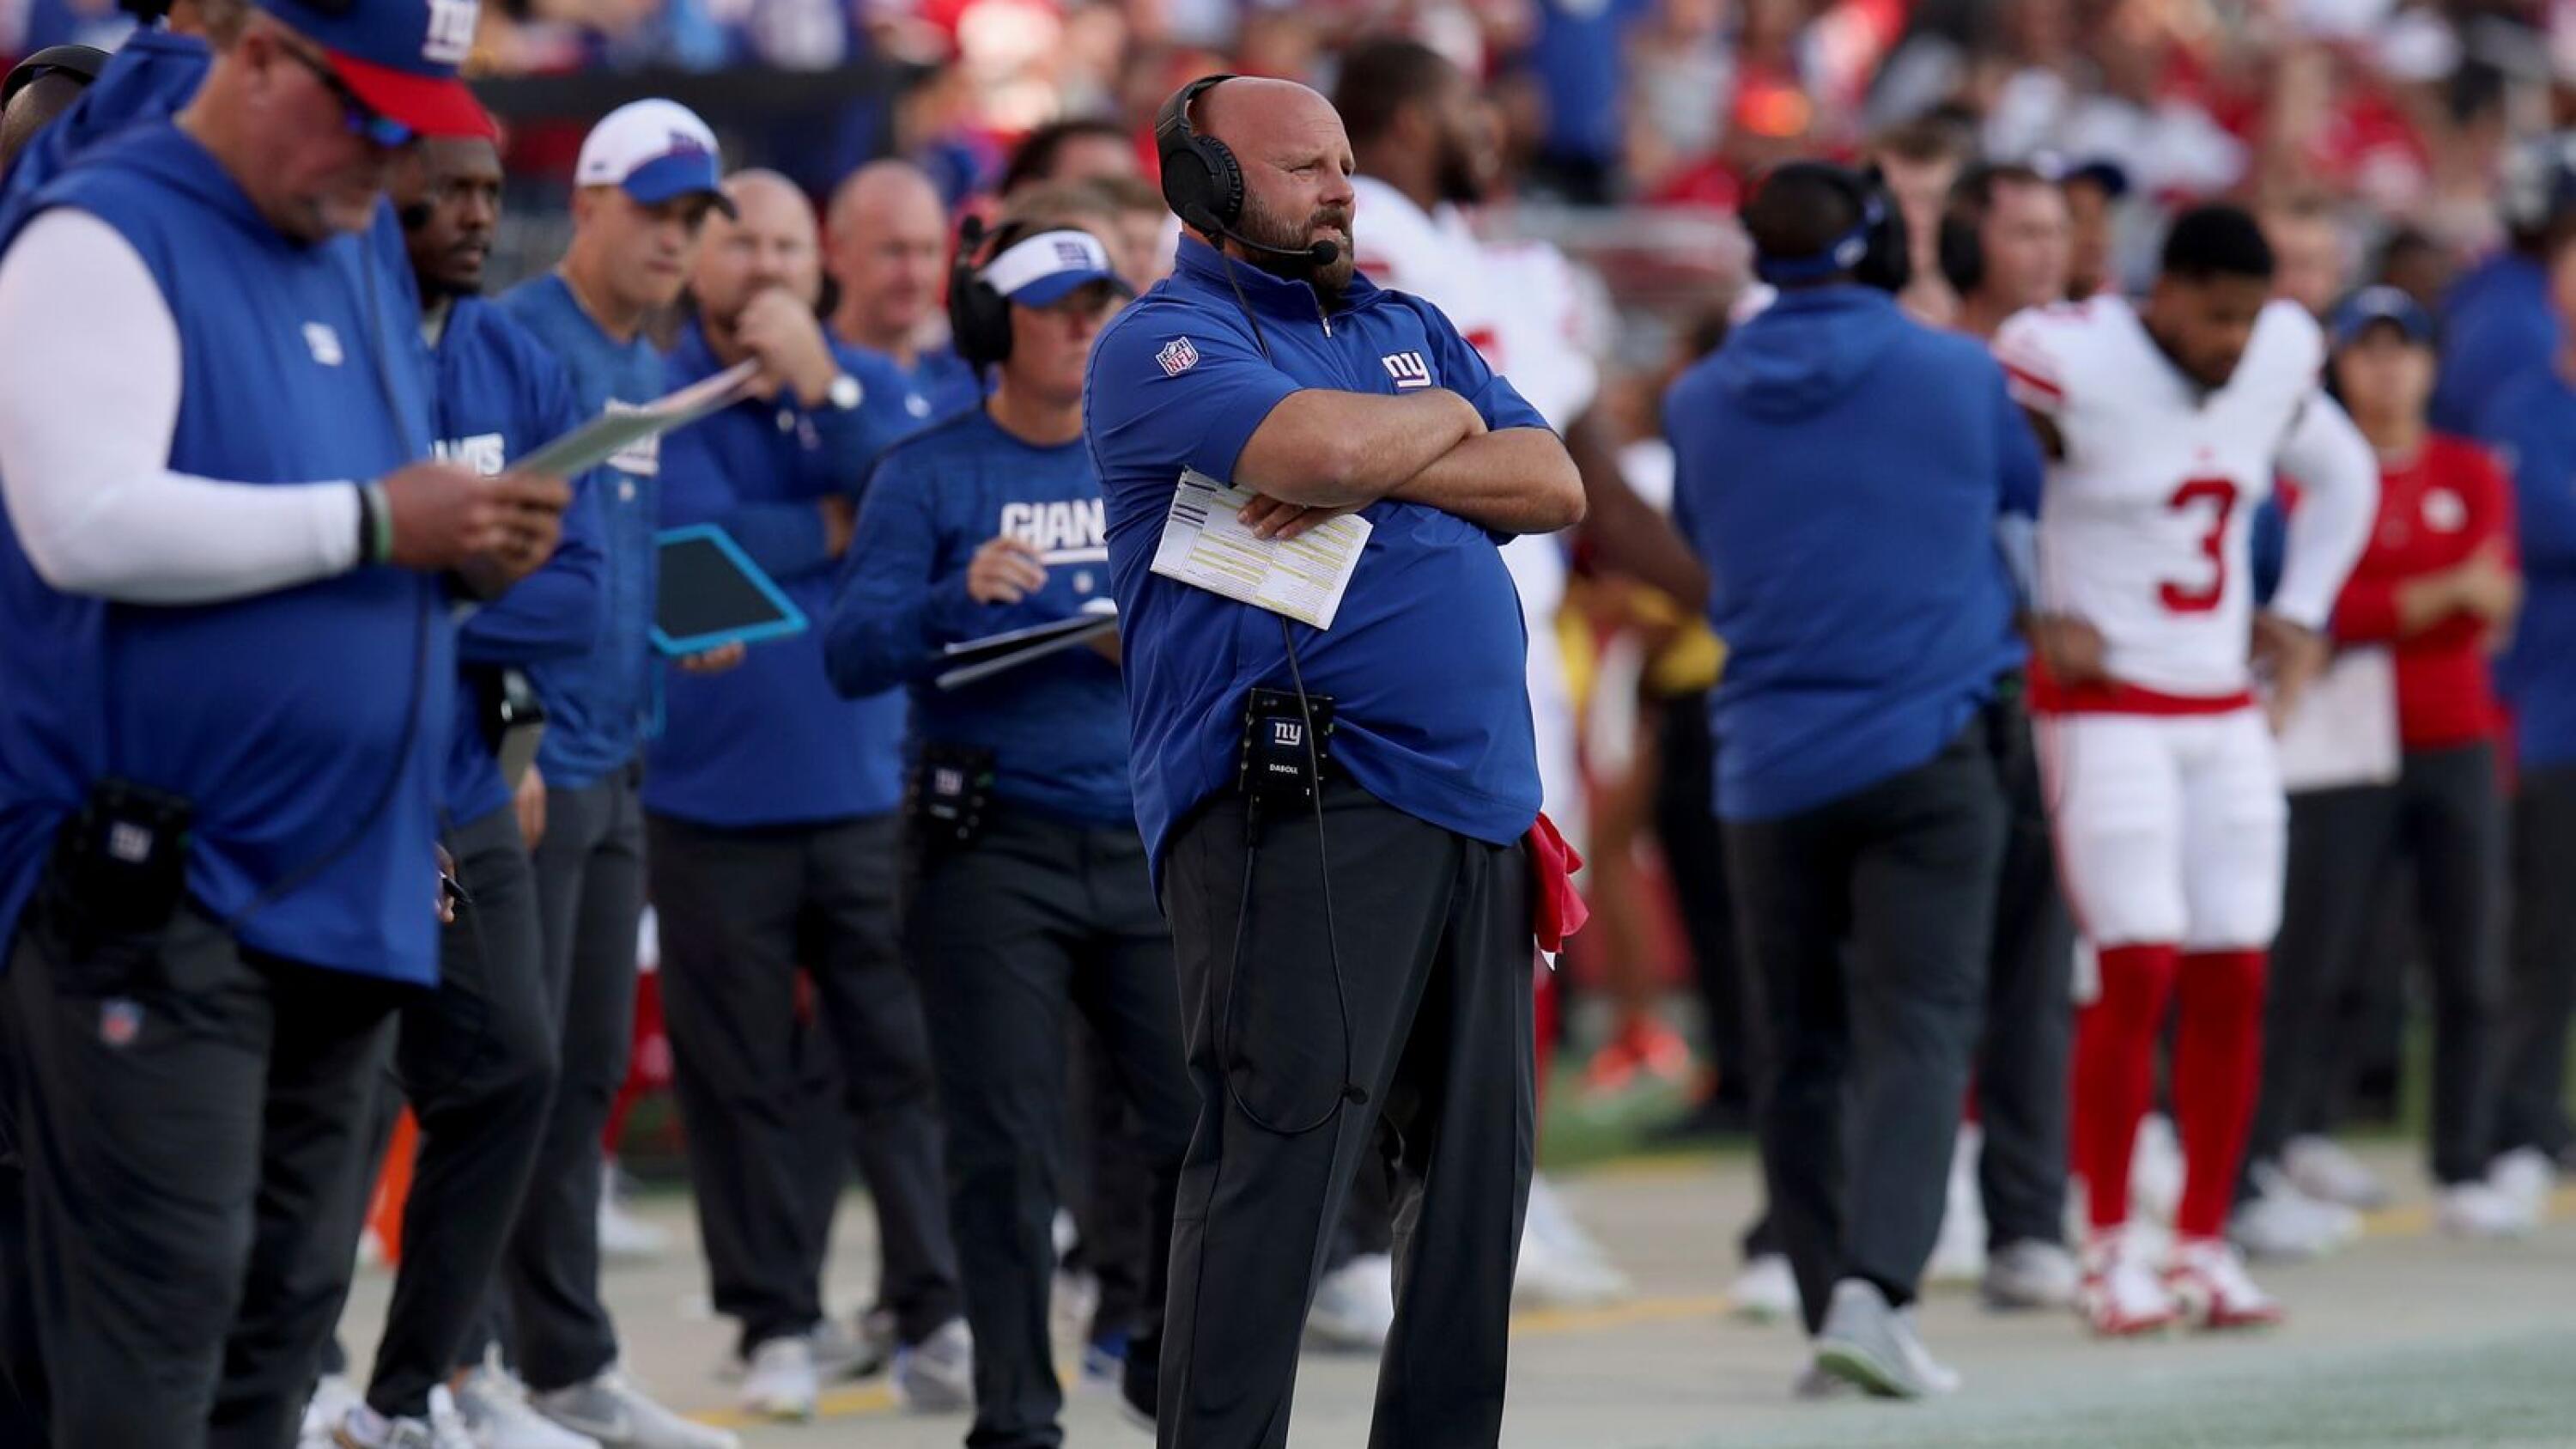 1 biggest concern for Giants heading into playoff stretch run